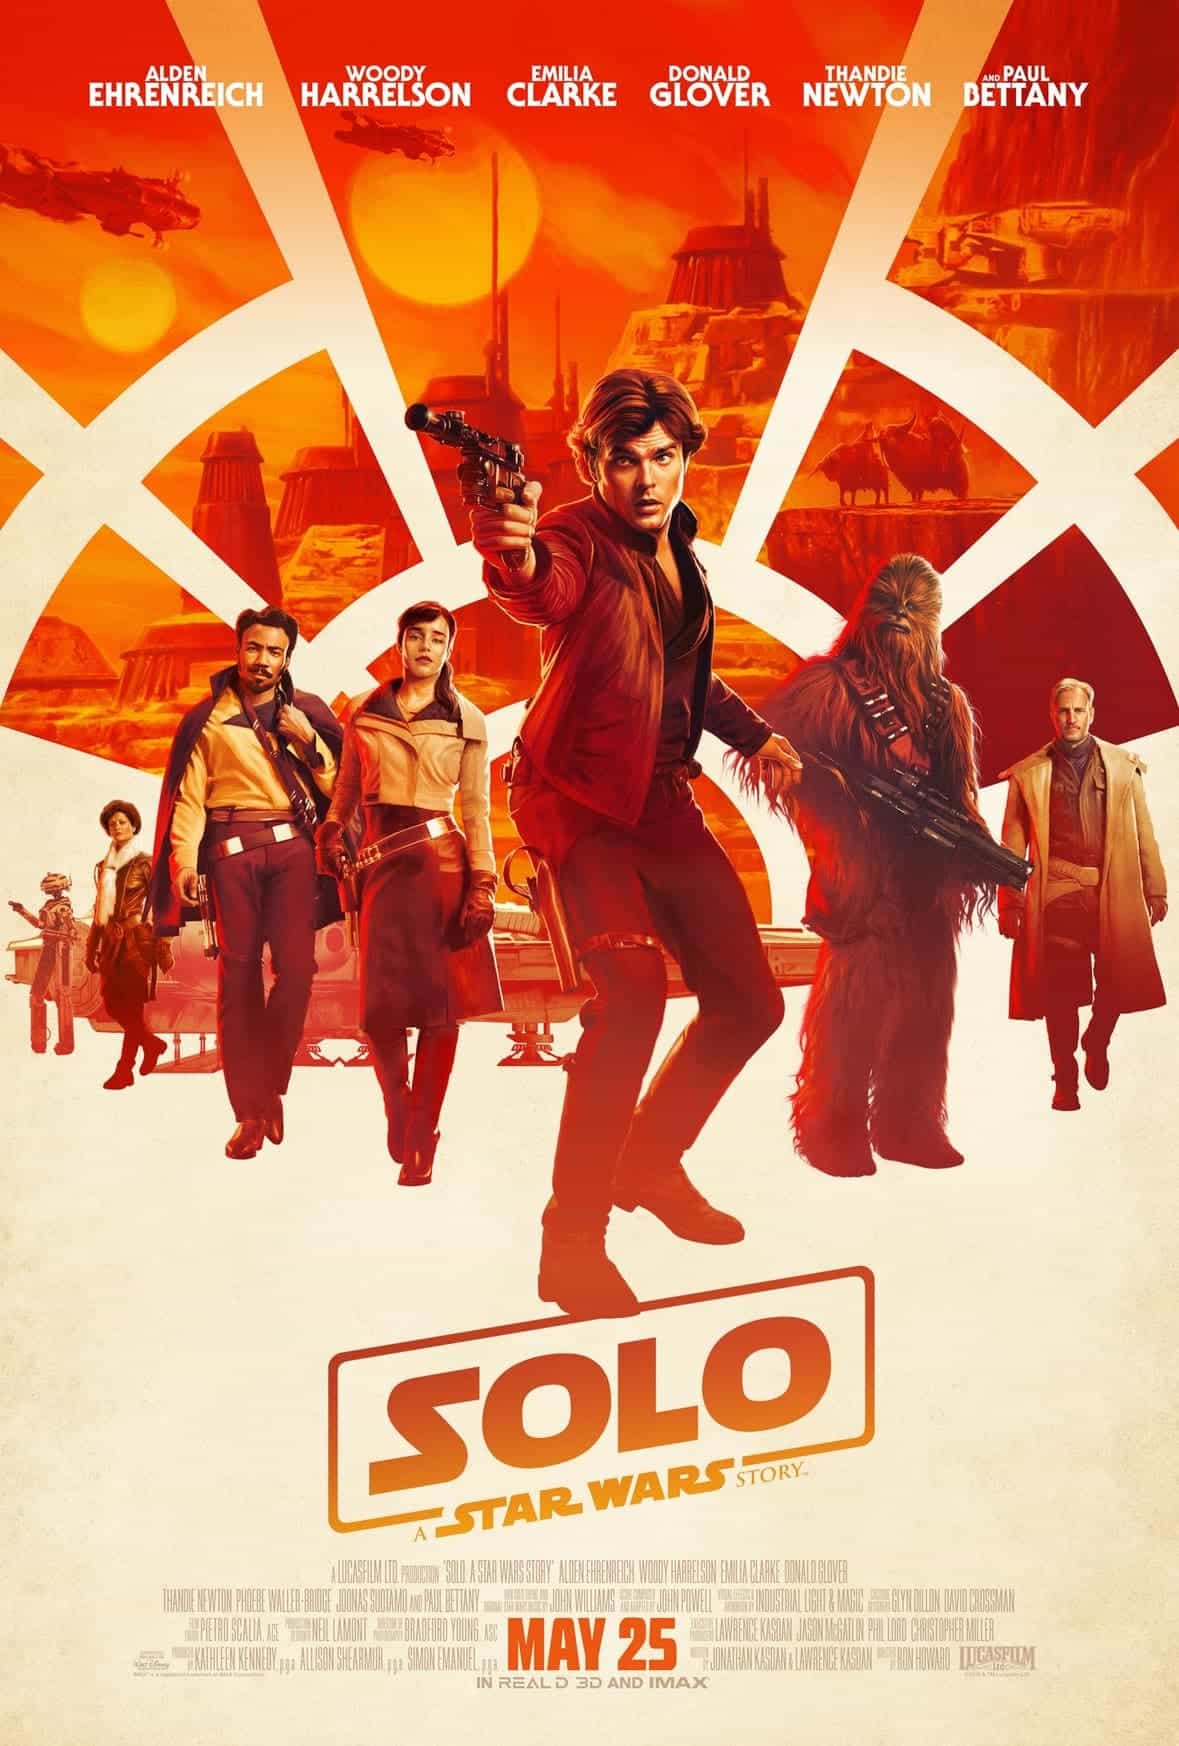 New, and probably final, trailer for the upcoming Star Wars prequel Solo: A Star Wars Story